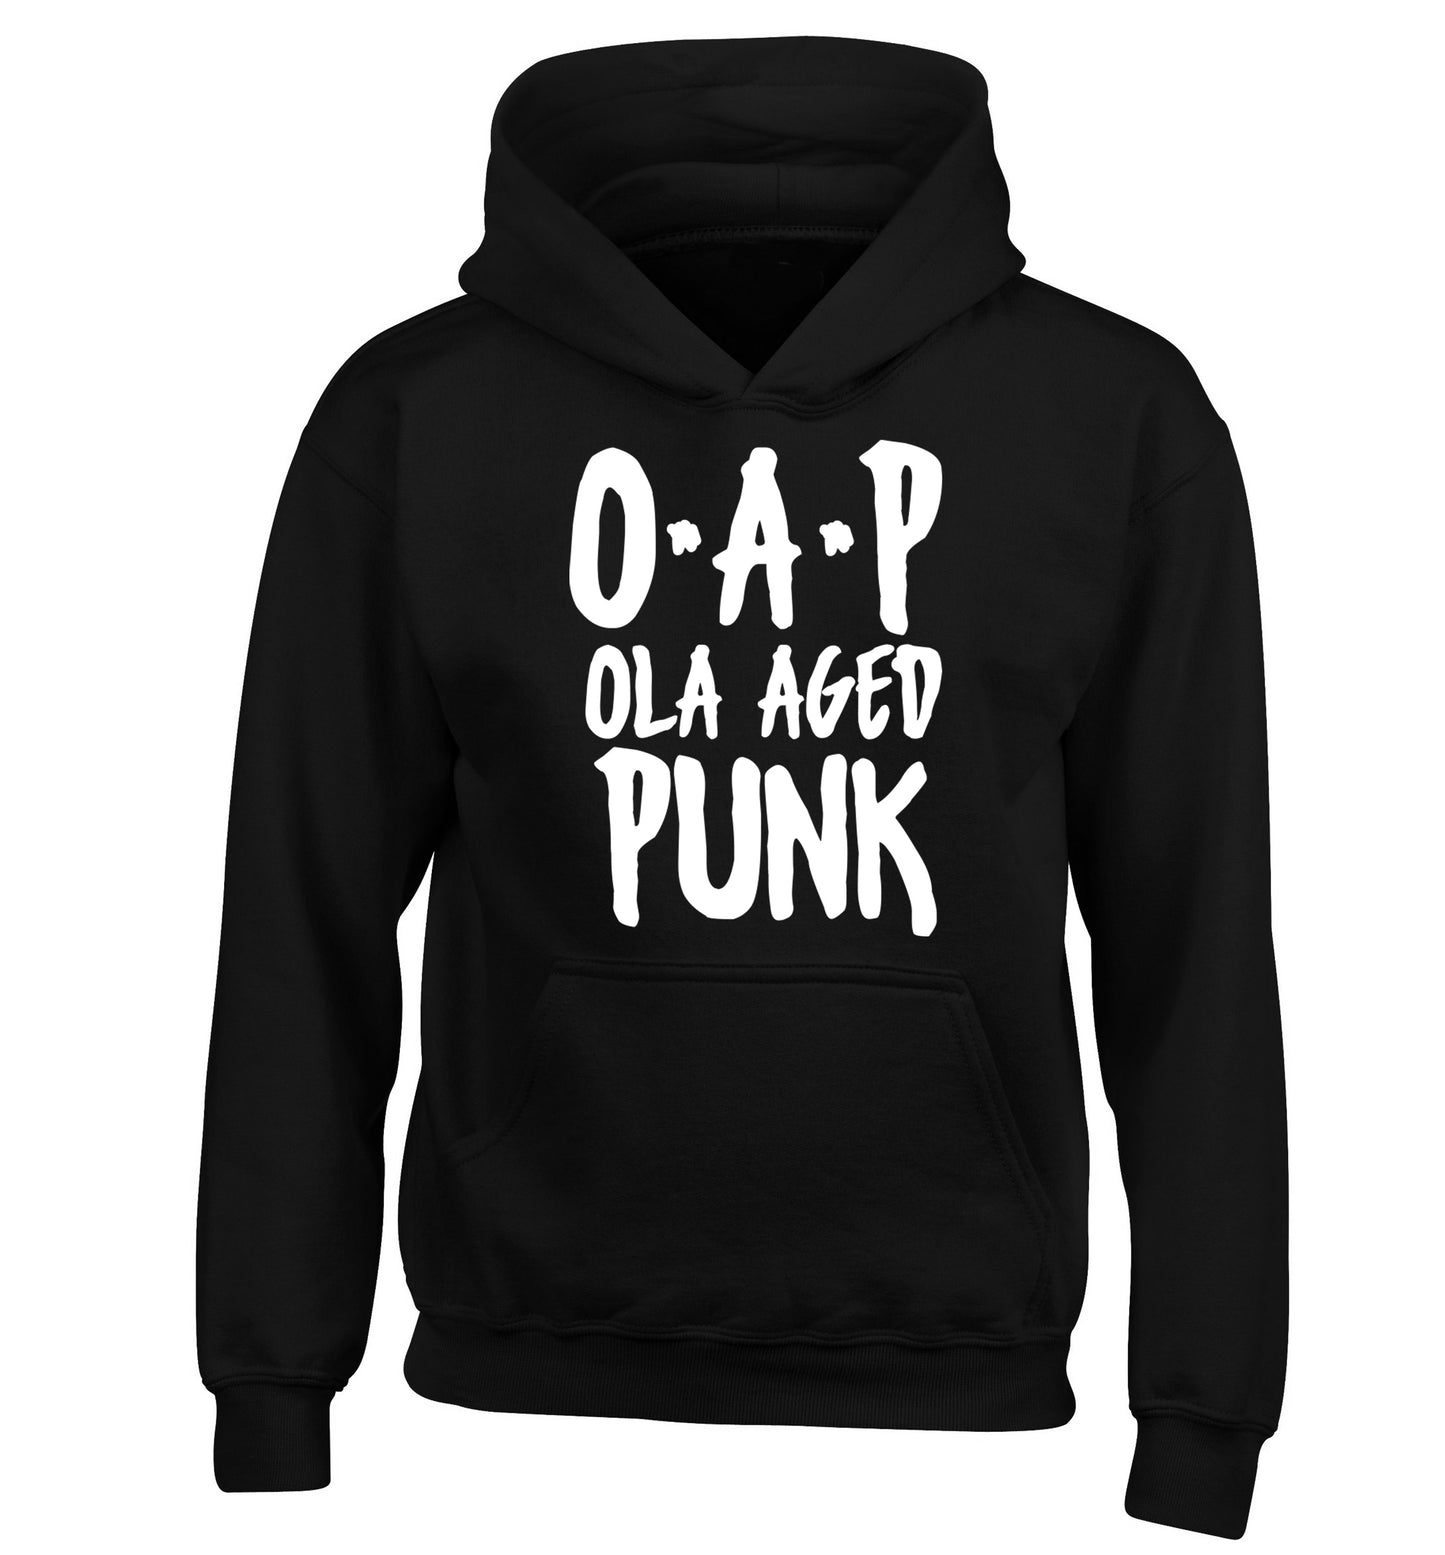 O.A.P Old Aged Punk children's black hoodie 12-13 Years